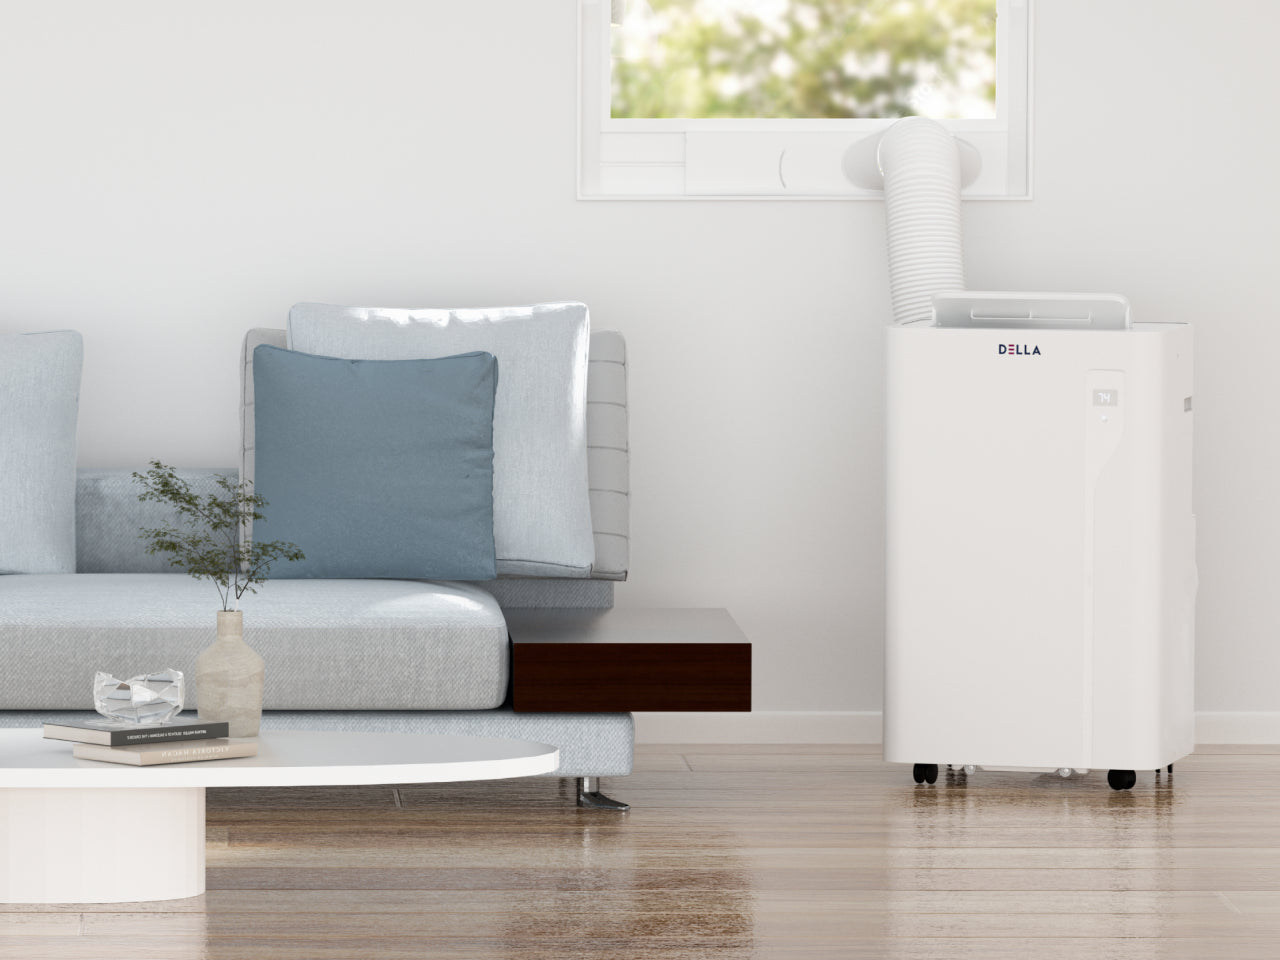 Effortless Installation: Setting Up Your Della Home Air Conditioner